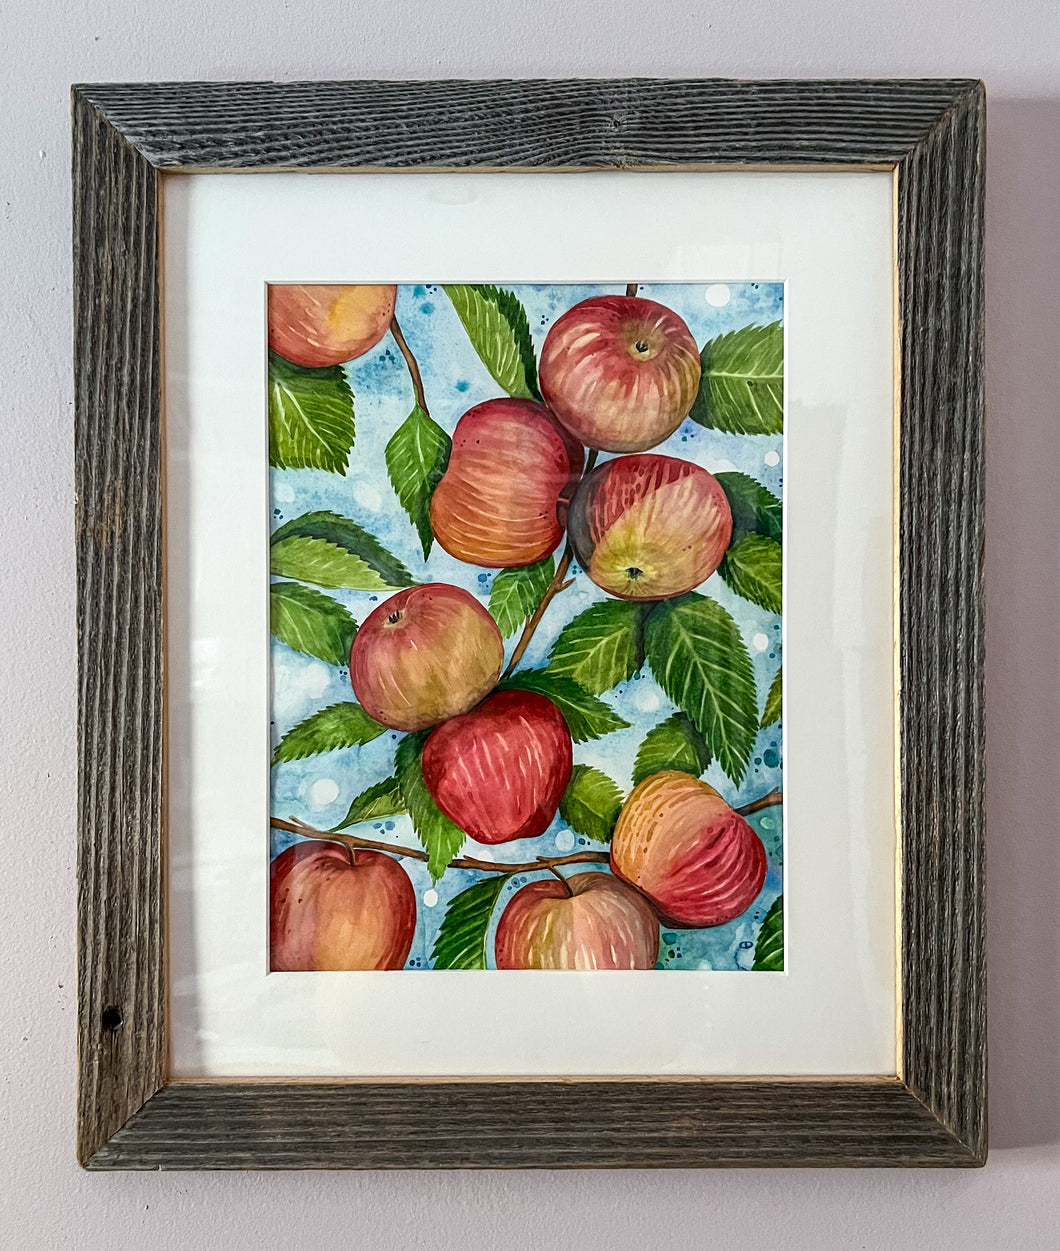 Simple Pleasures, Apples | Framed Original Watercolor by Cynthia Oswald